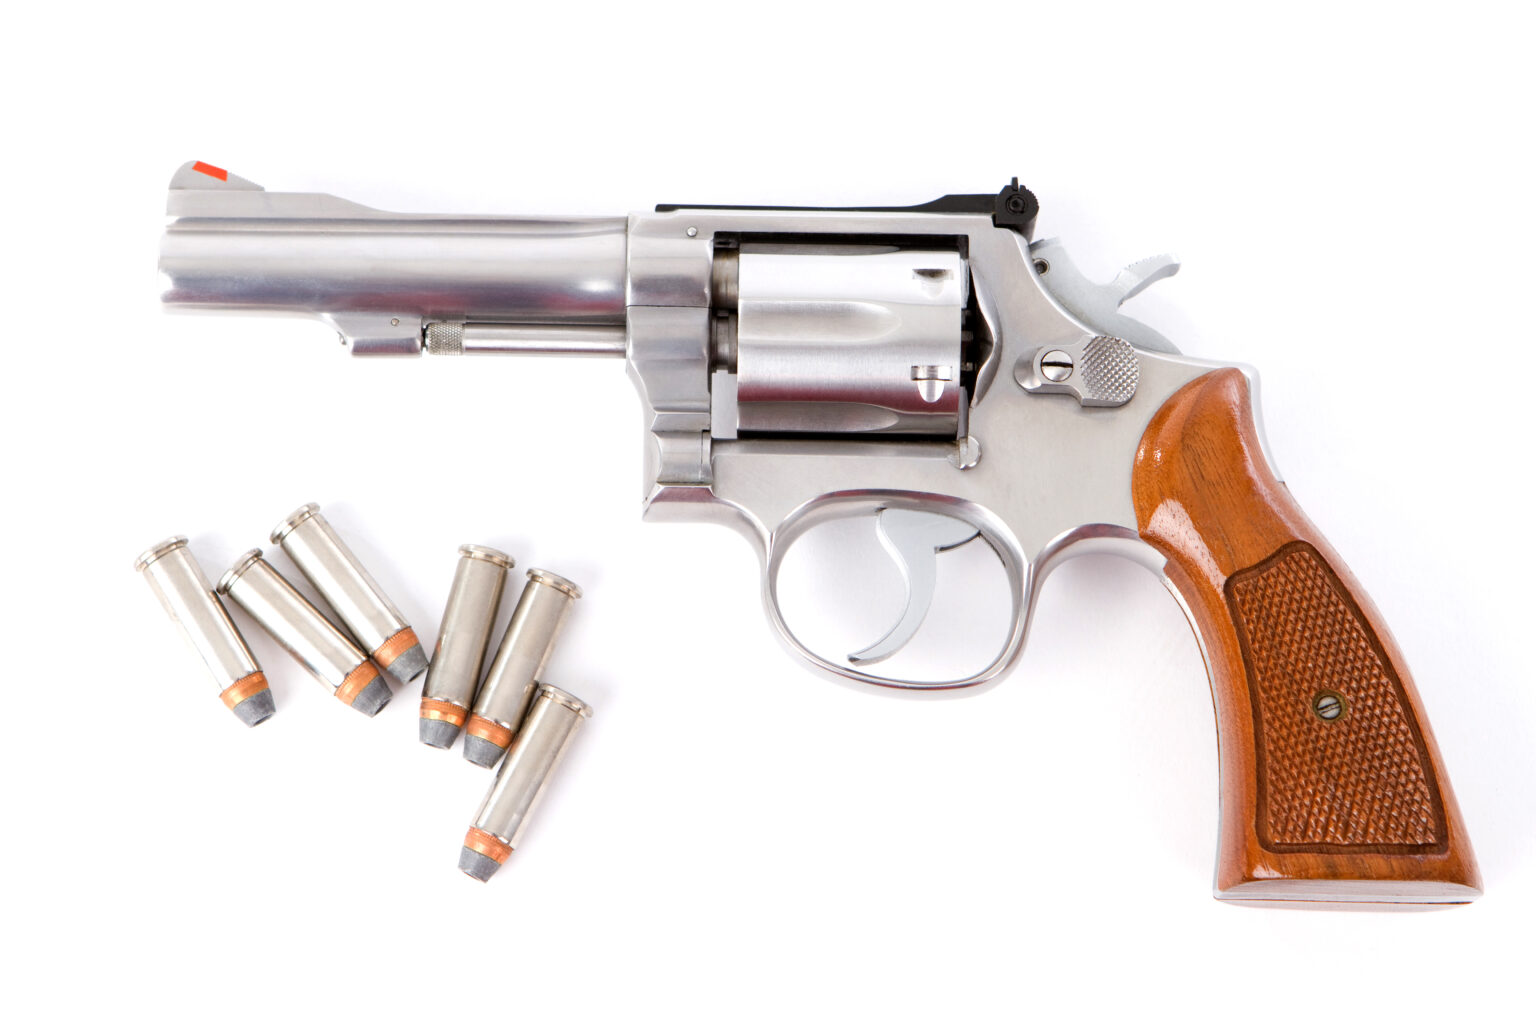 38 special vs 9mm for home defense